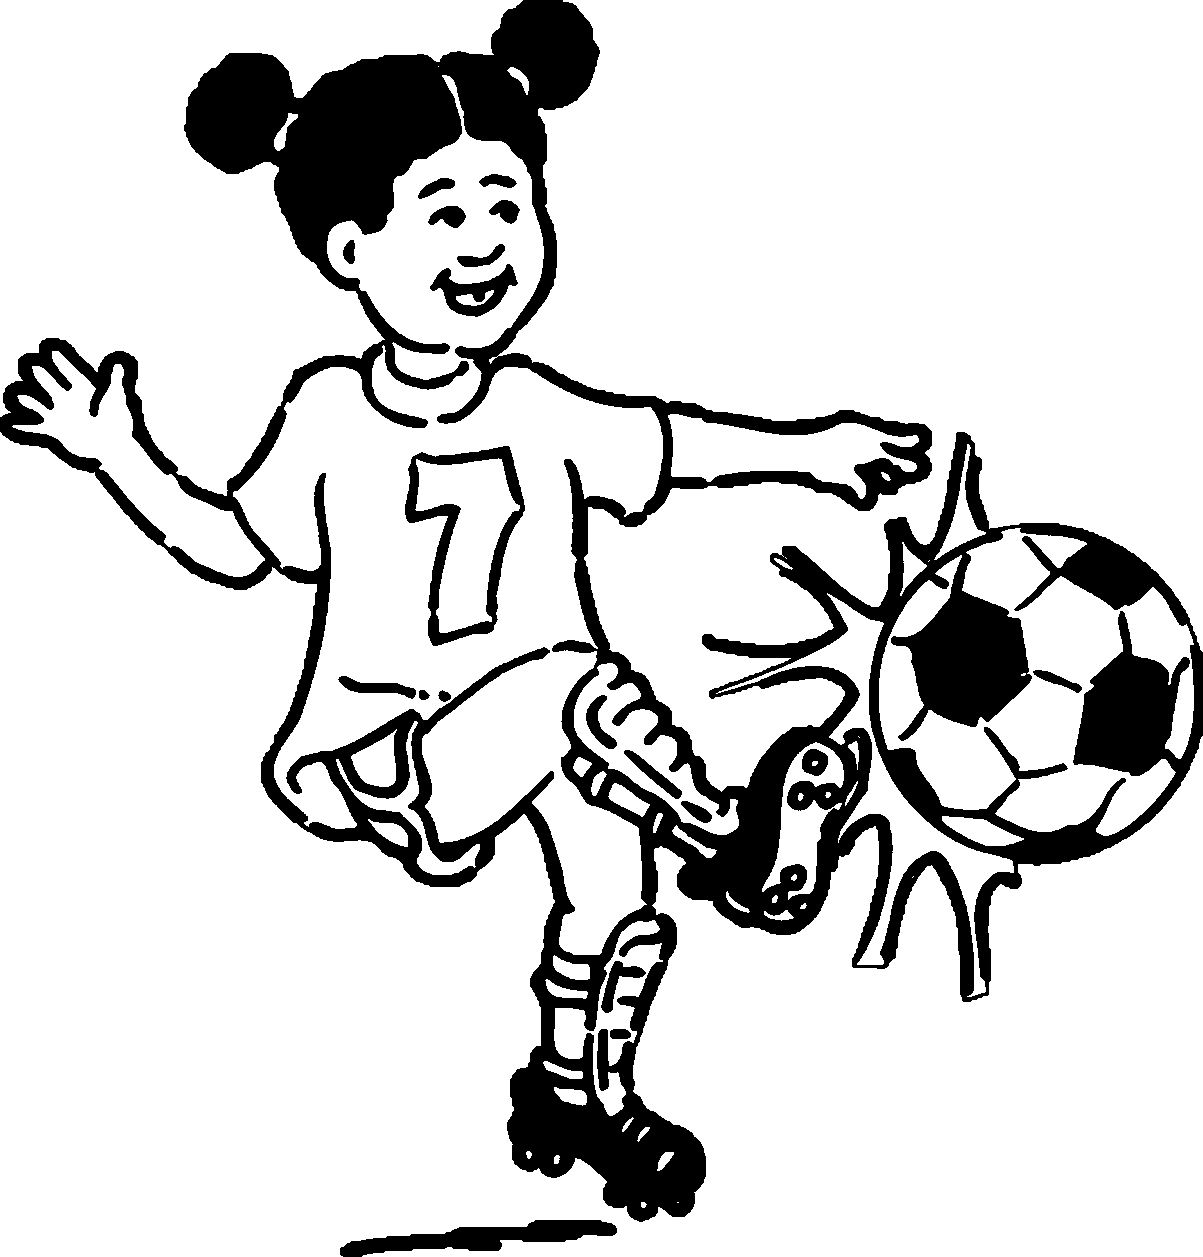 Girl Playing Soccer Playing Football Coloring Page | Wecoloringpage